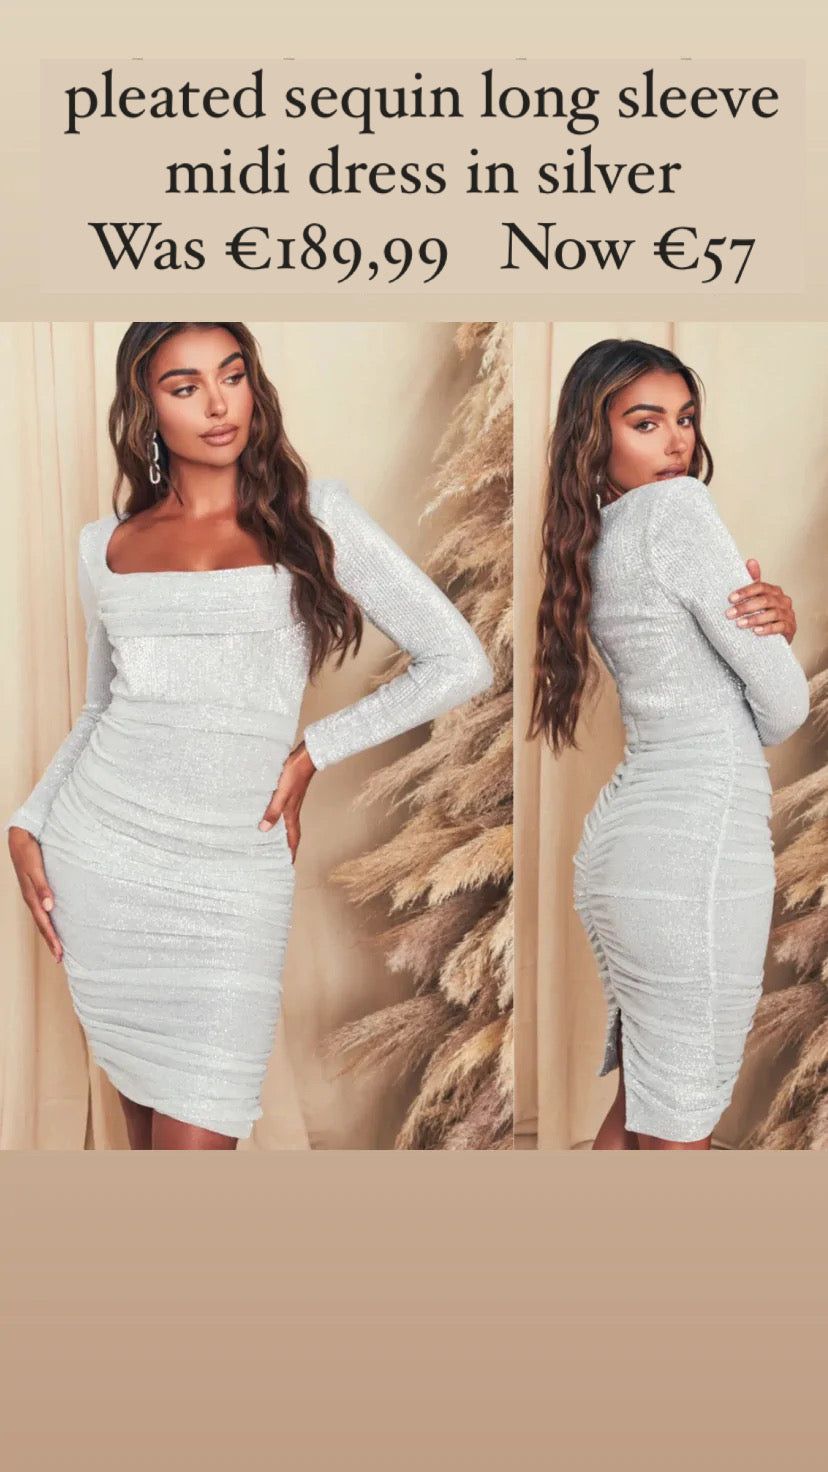 pleated sequin long sleeve midi dress in silver